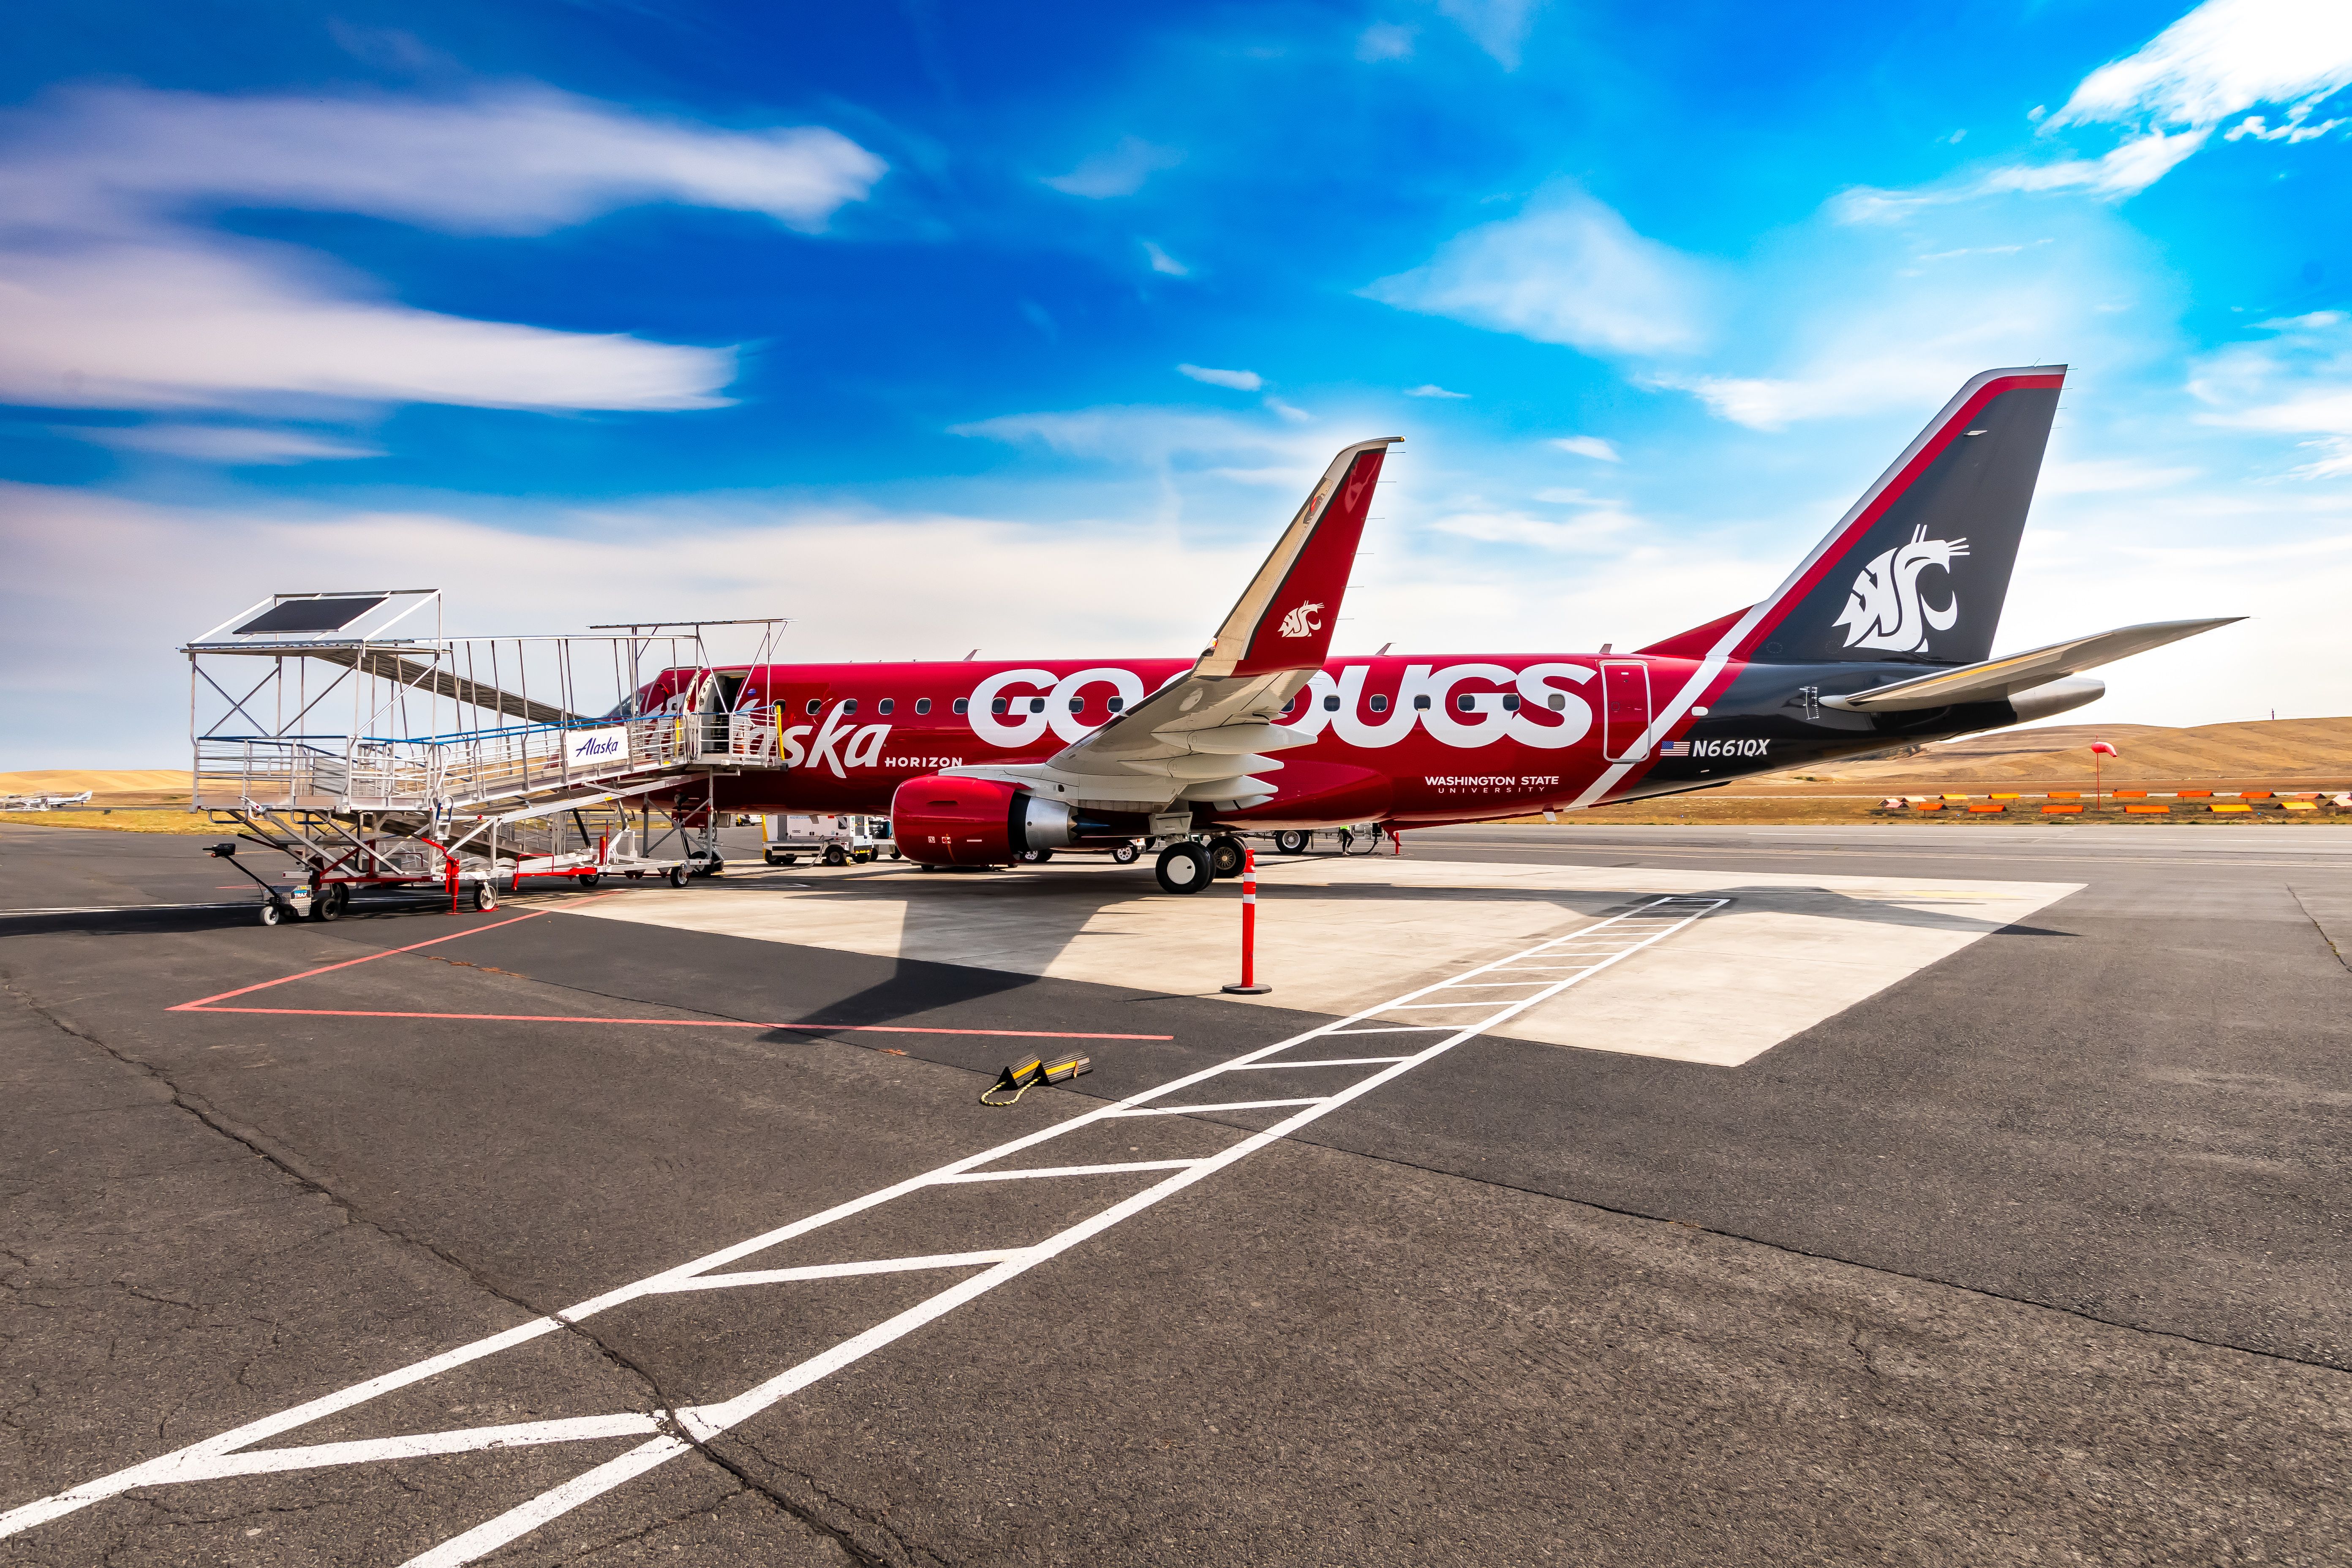 Go Cougs E175 Beauty Shot on the PUW Tarmac